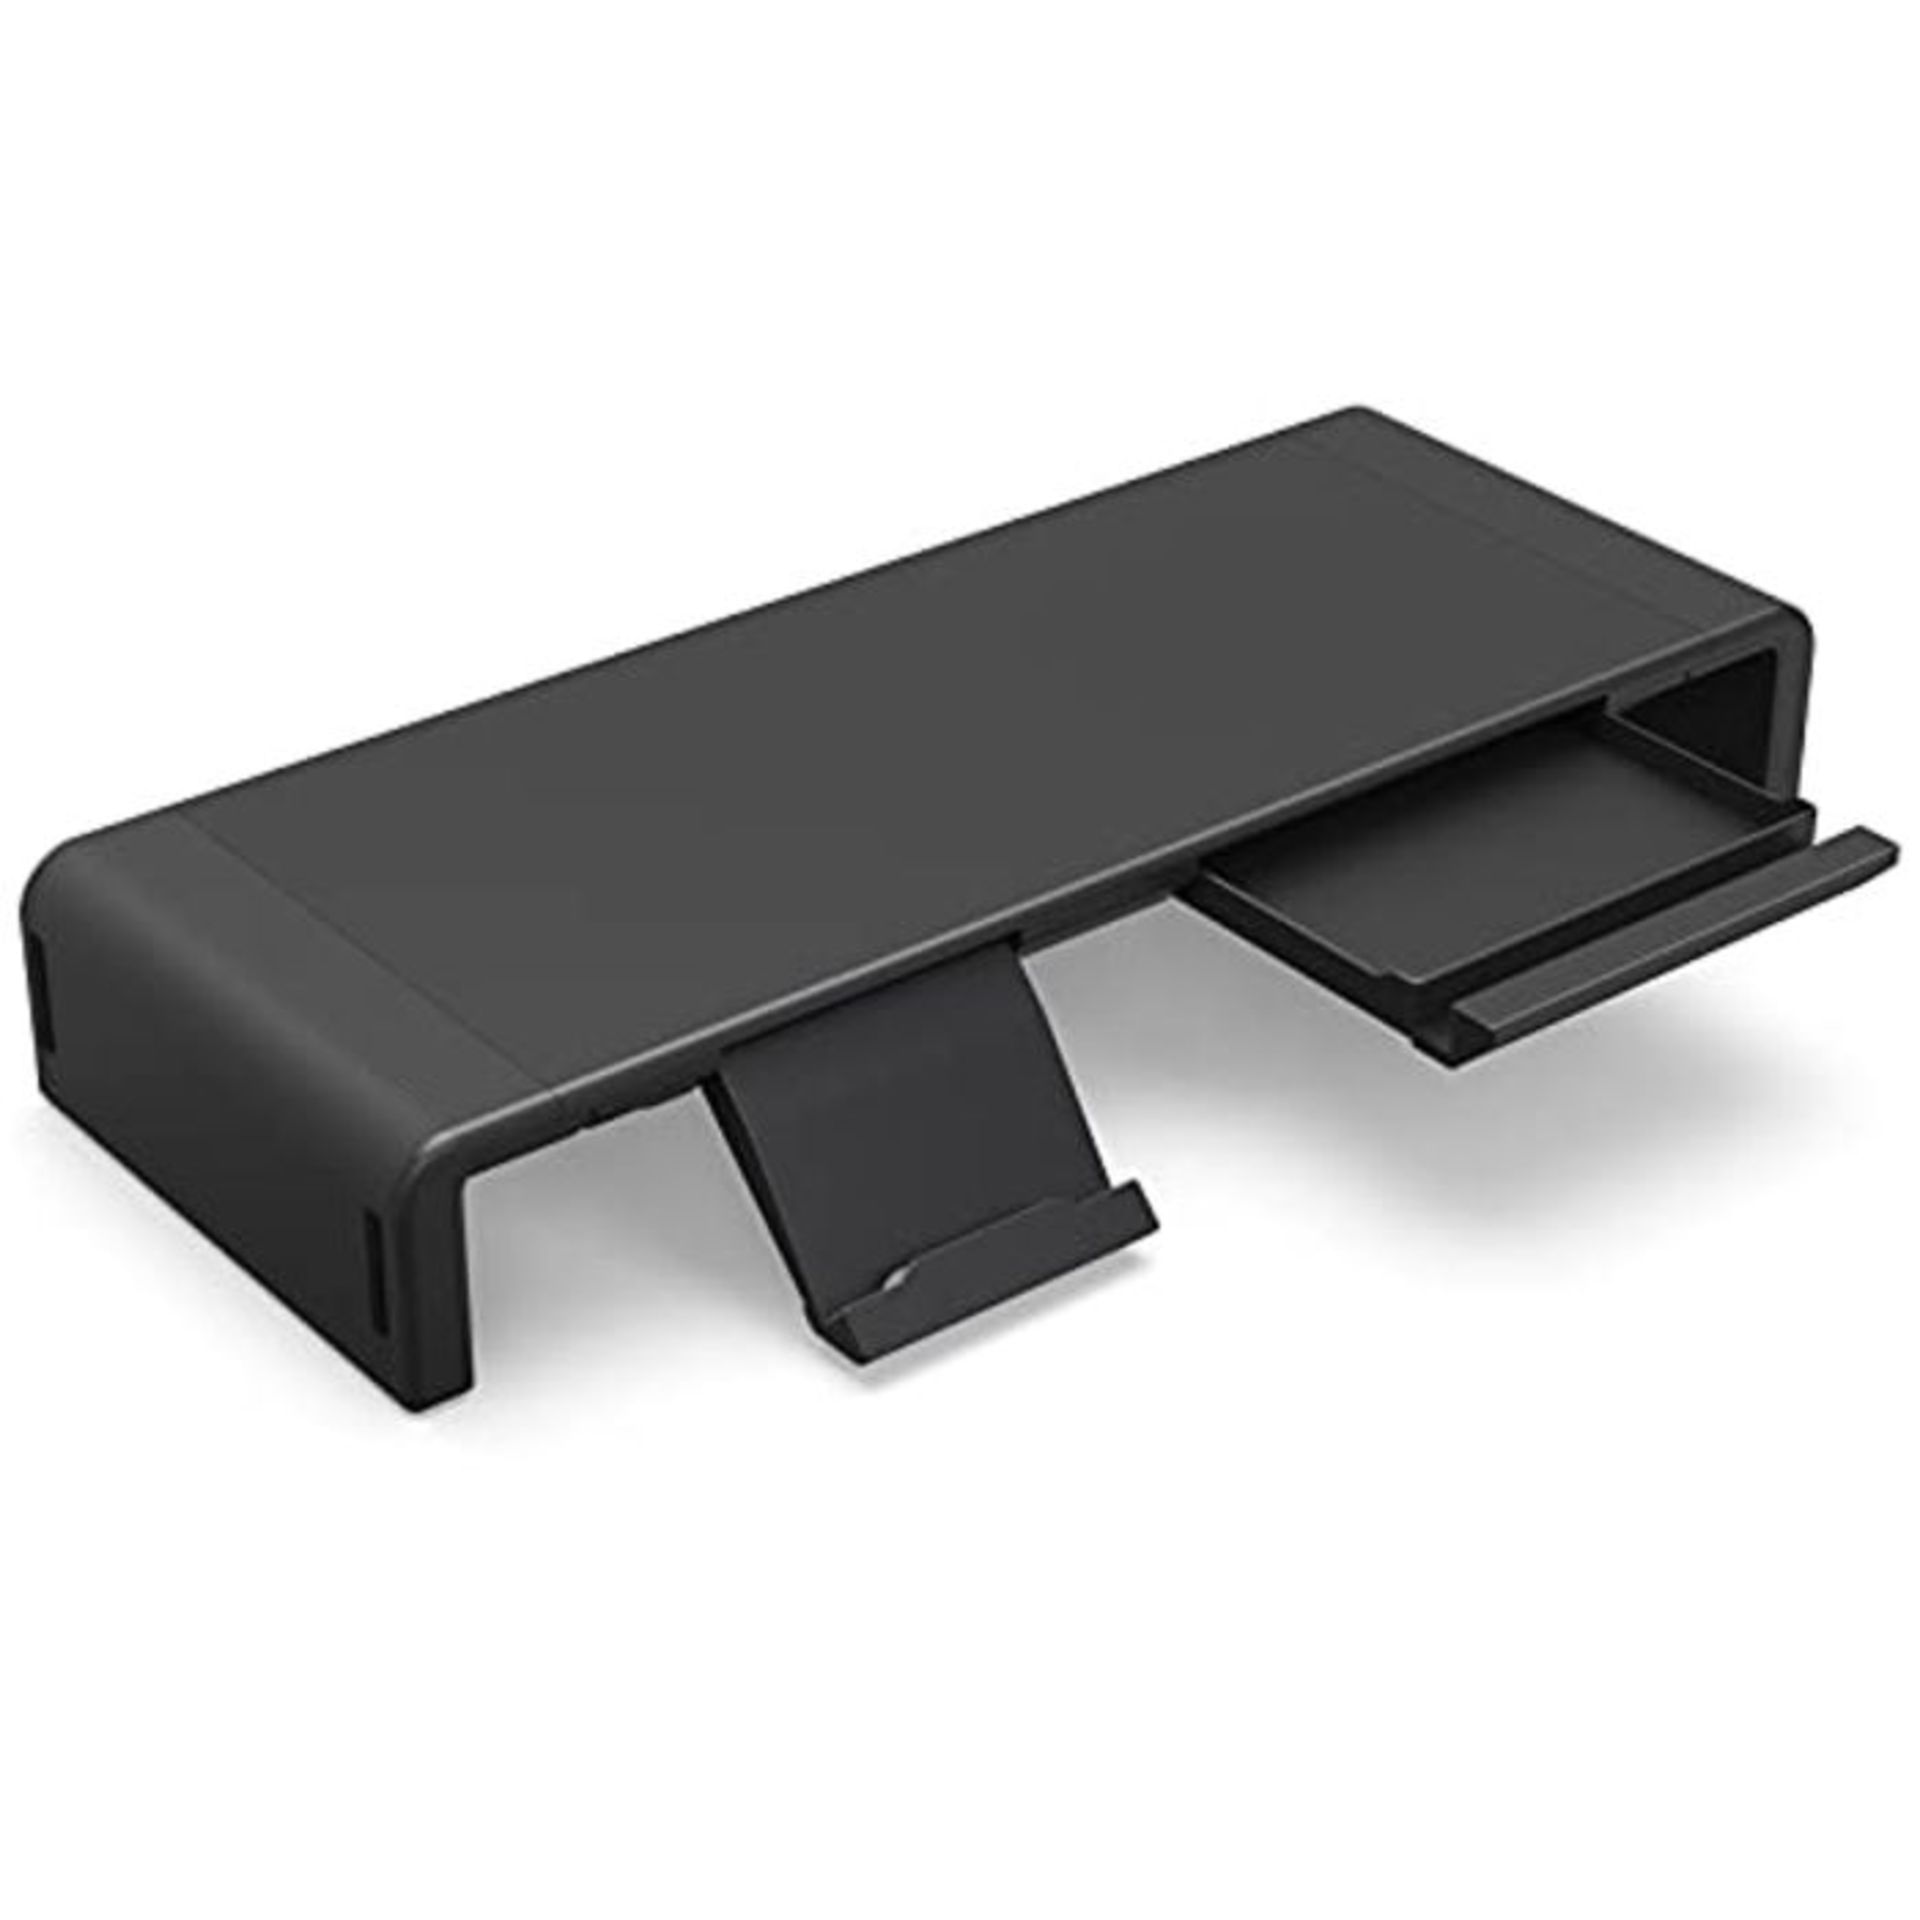 Klearlook Foldable Monitor Stand Built in Storage Drawer Tablet&Phone Stand Holder, Wi